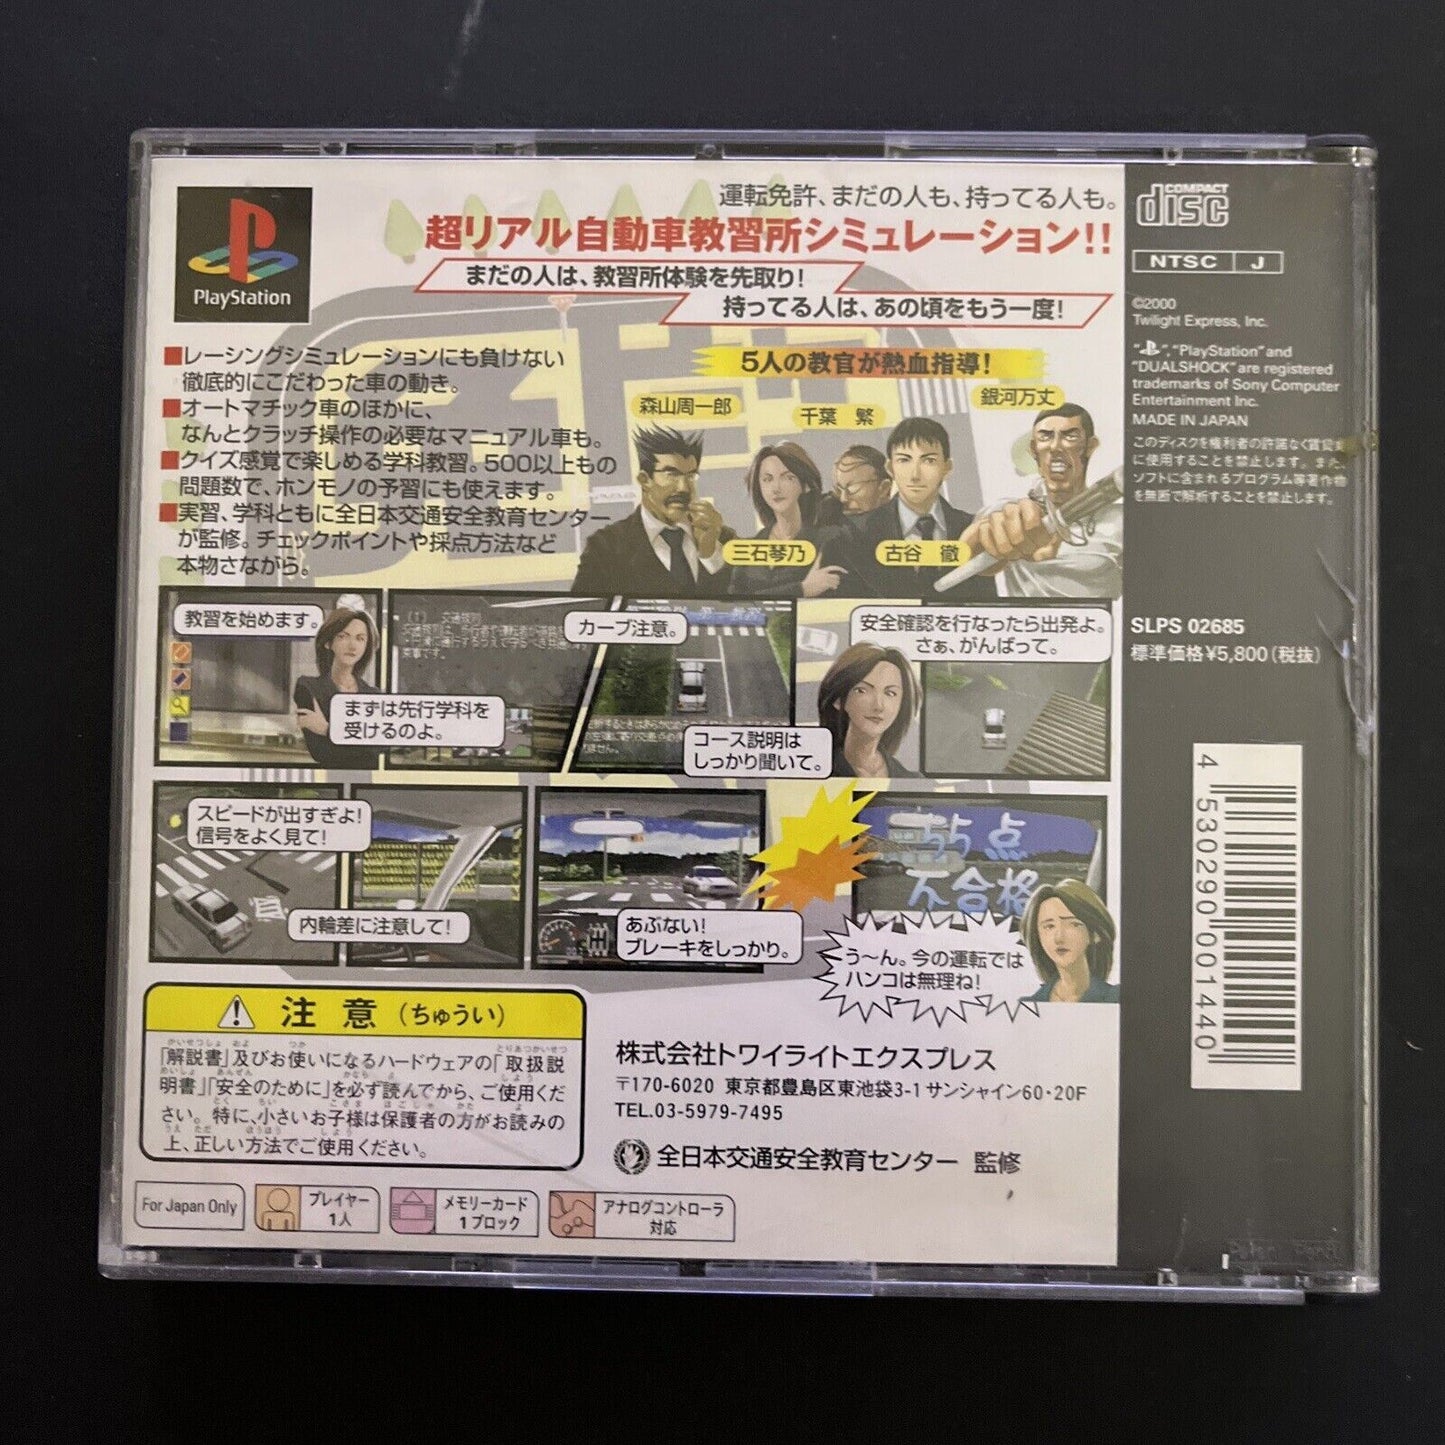 Get The License - Sony PlayStation PS1 NTSC-J JAPAN 2000 Car Simulation Game